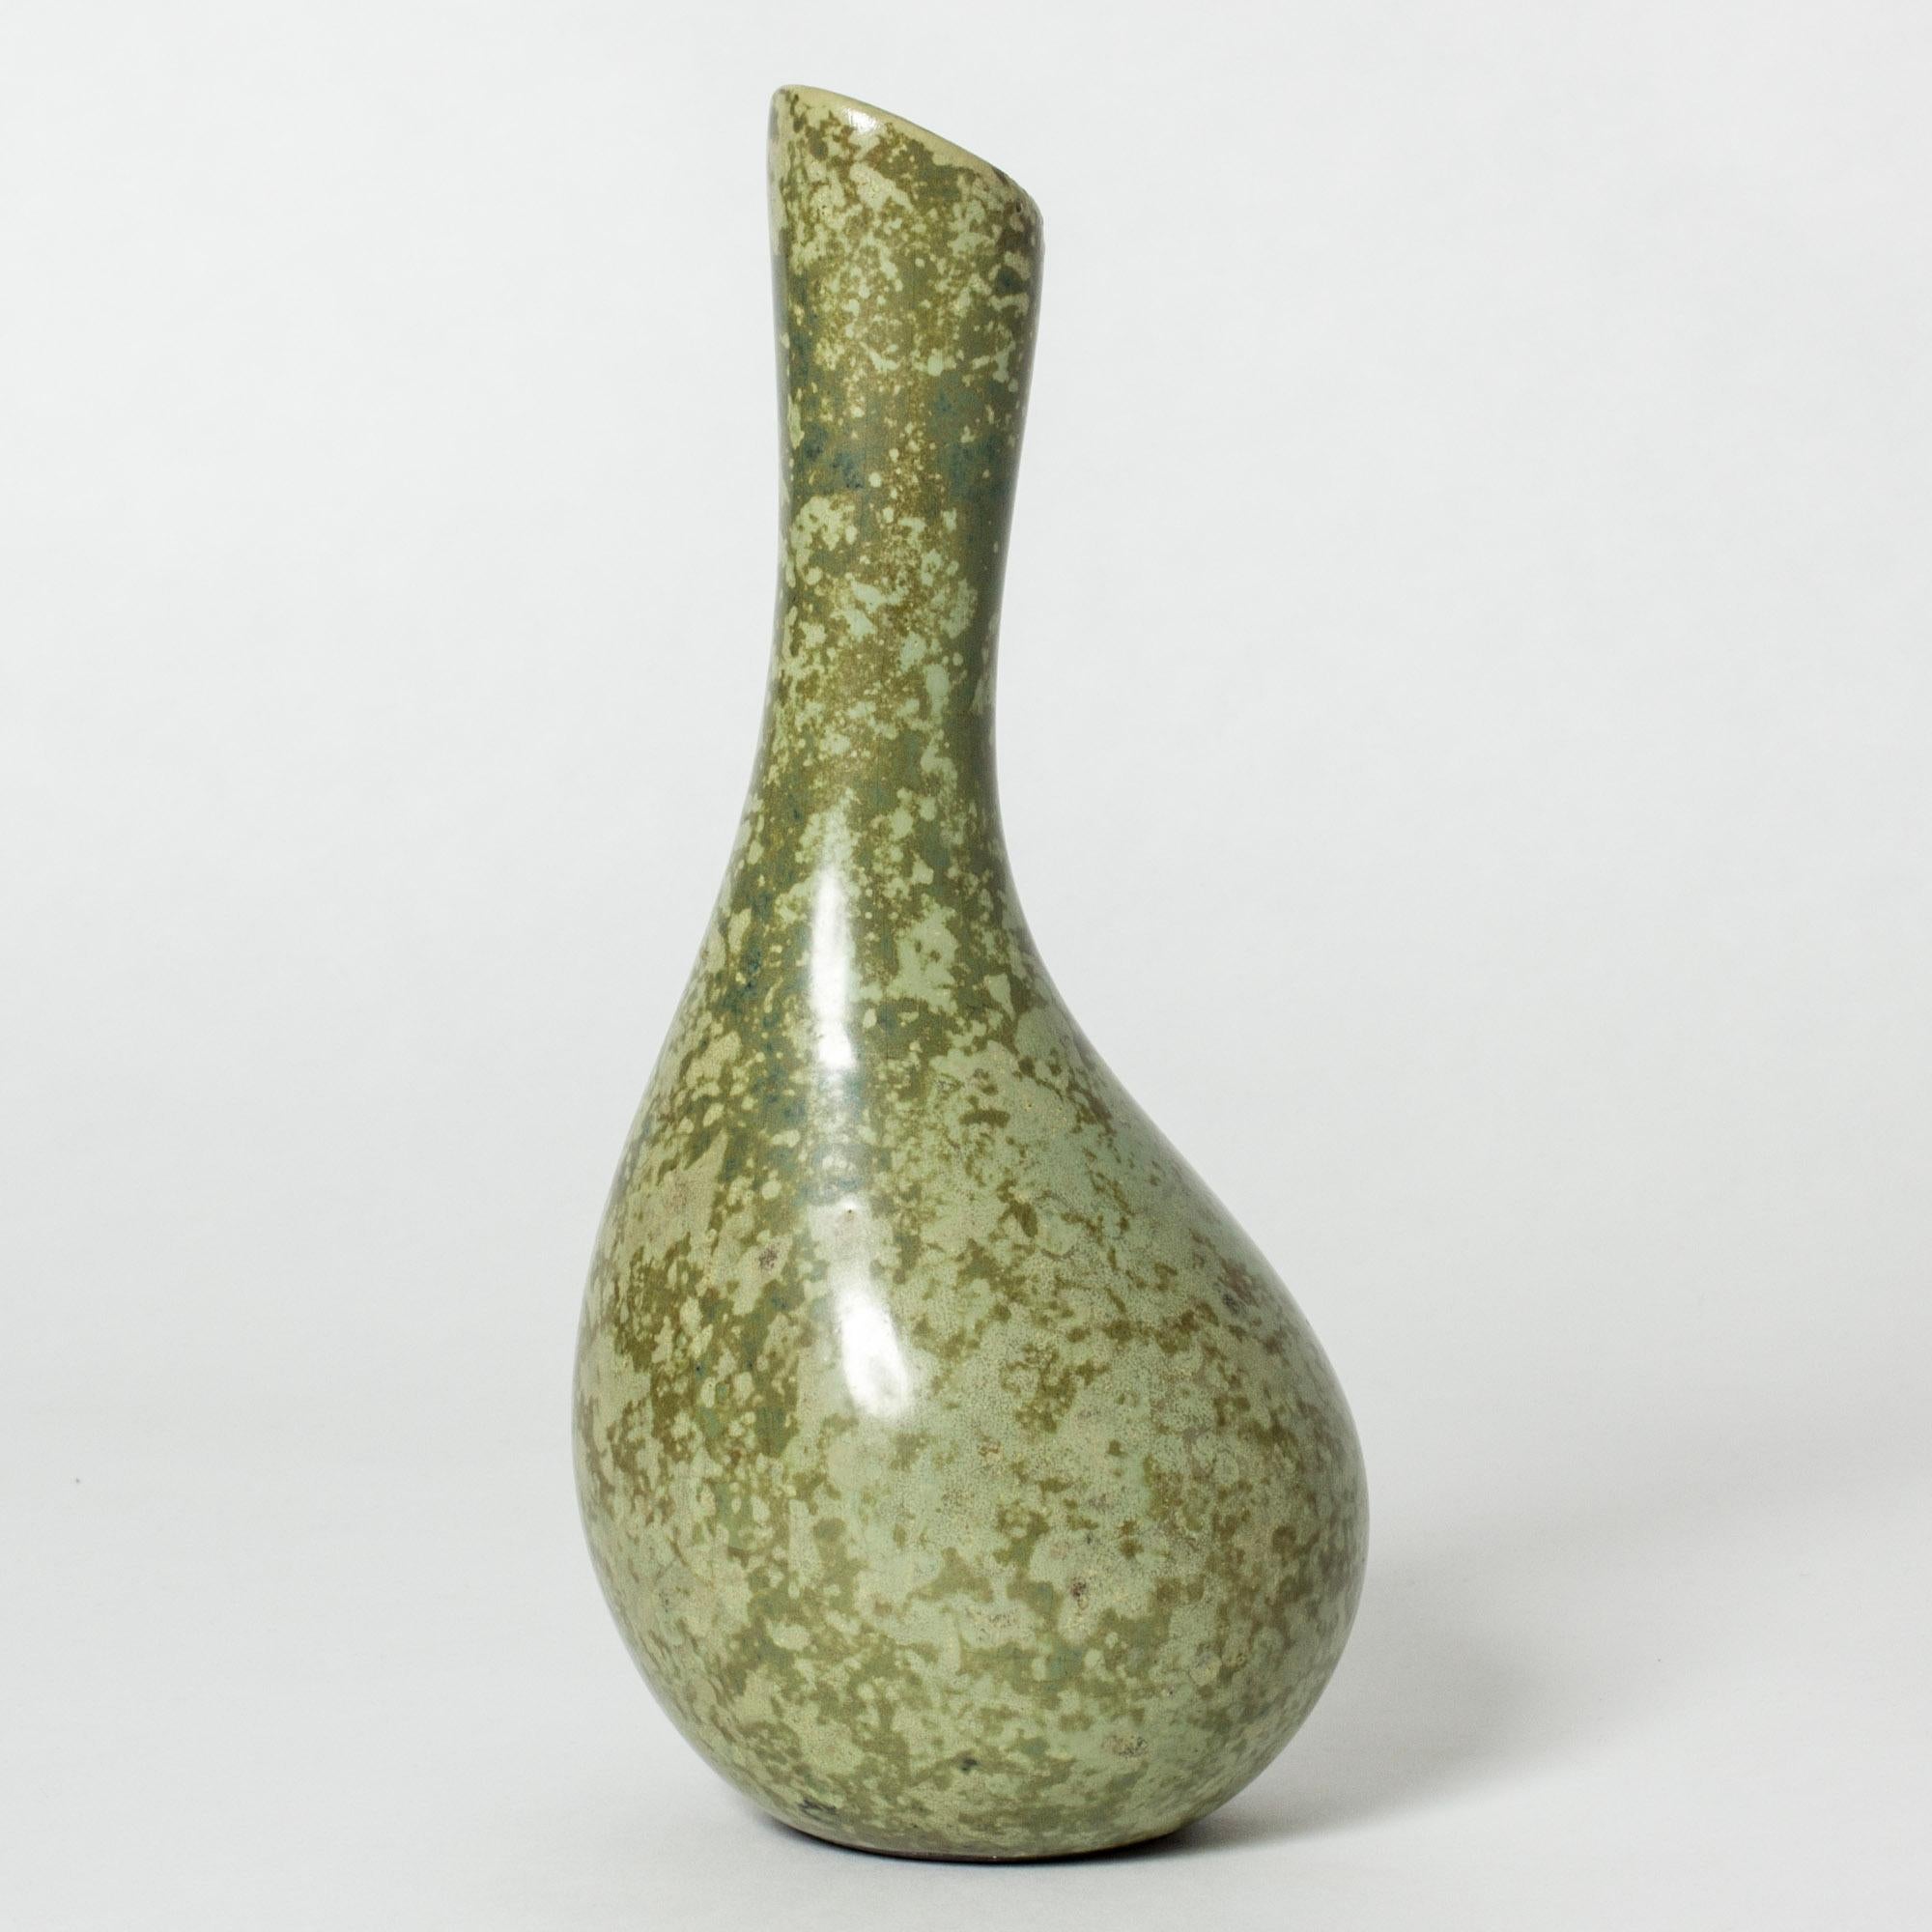 Lovely vase by Hans Hedberg, made in faience. Striking organic form with olive colored glaze and litchen-like flecks.